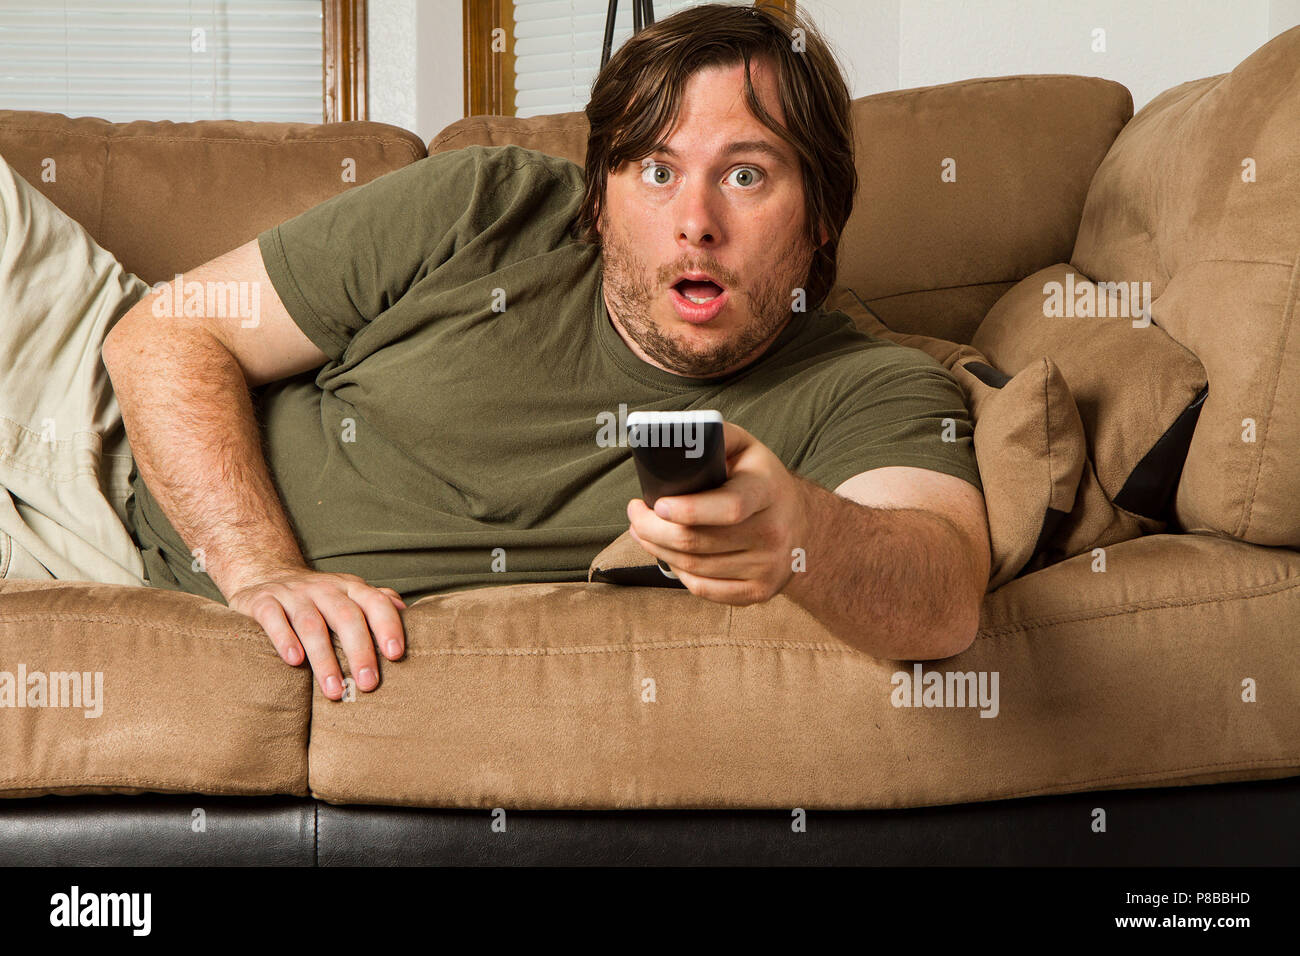 Over weight man watching something shocking on TV. Could it be tabloids, celebrity gossip, a movie, or something else? Stock Photo